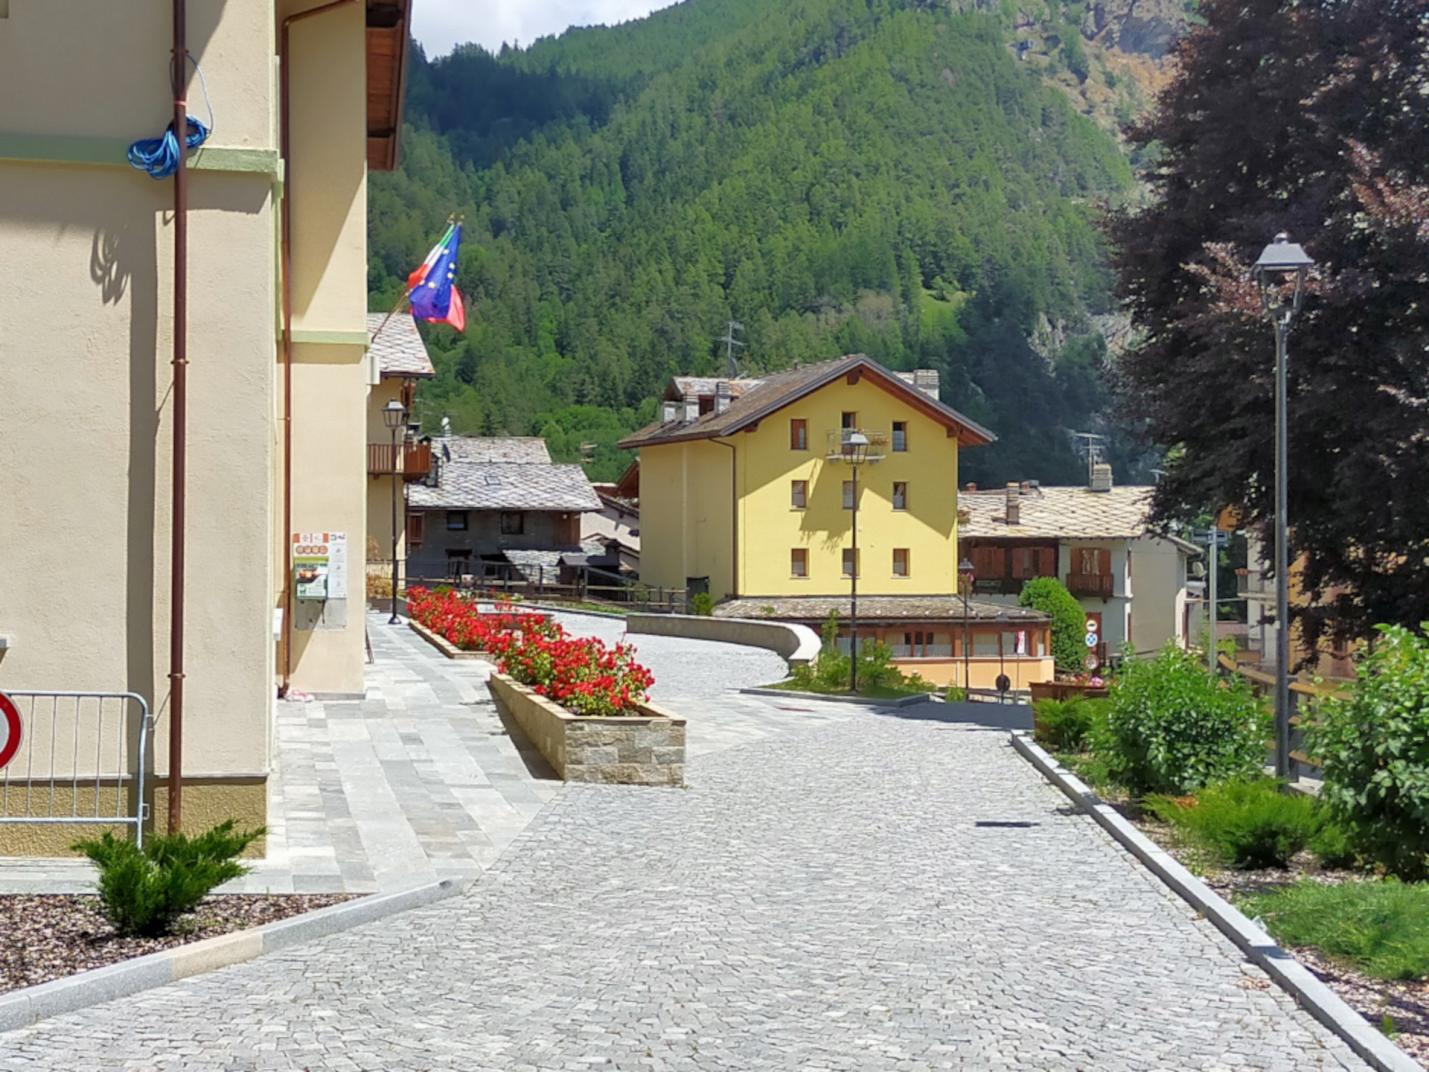 Piazza Municipio  Reading in the mountains: The dark hollow